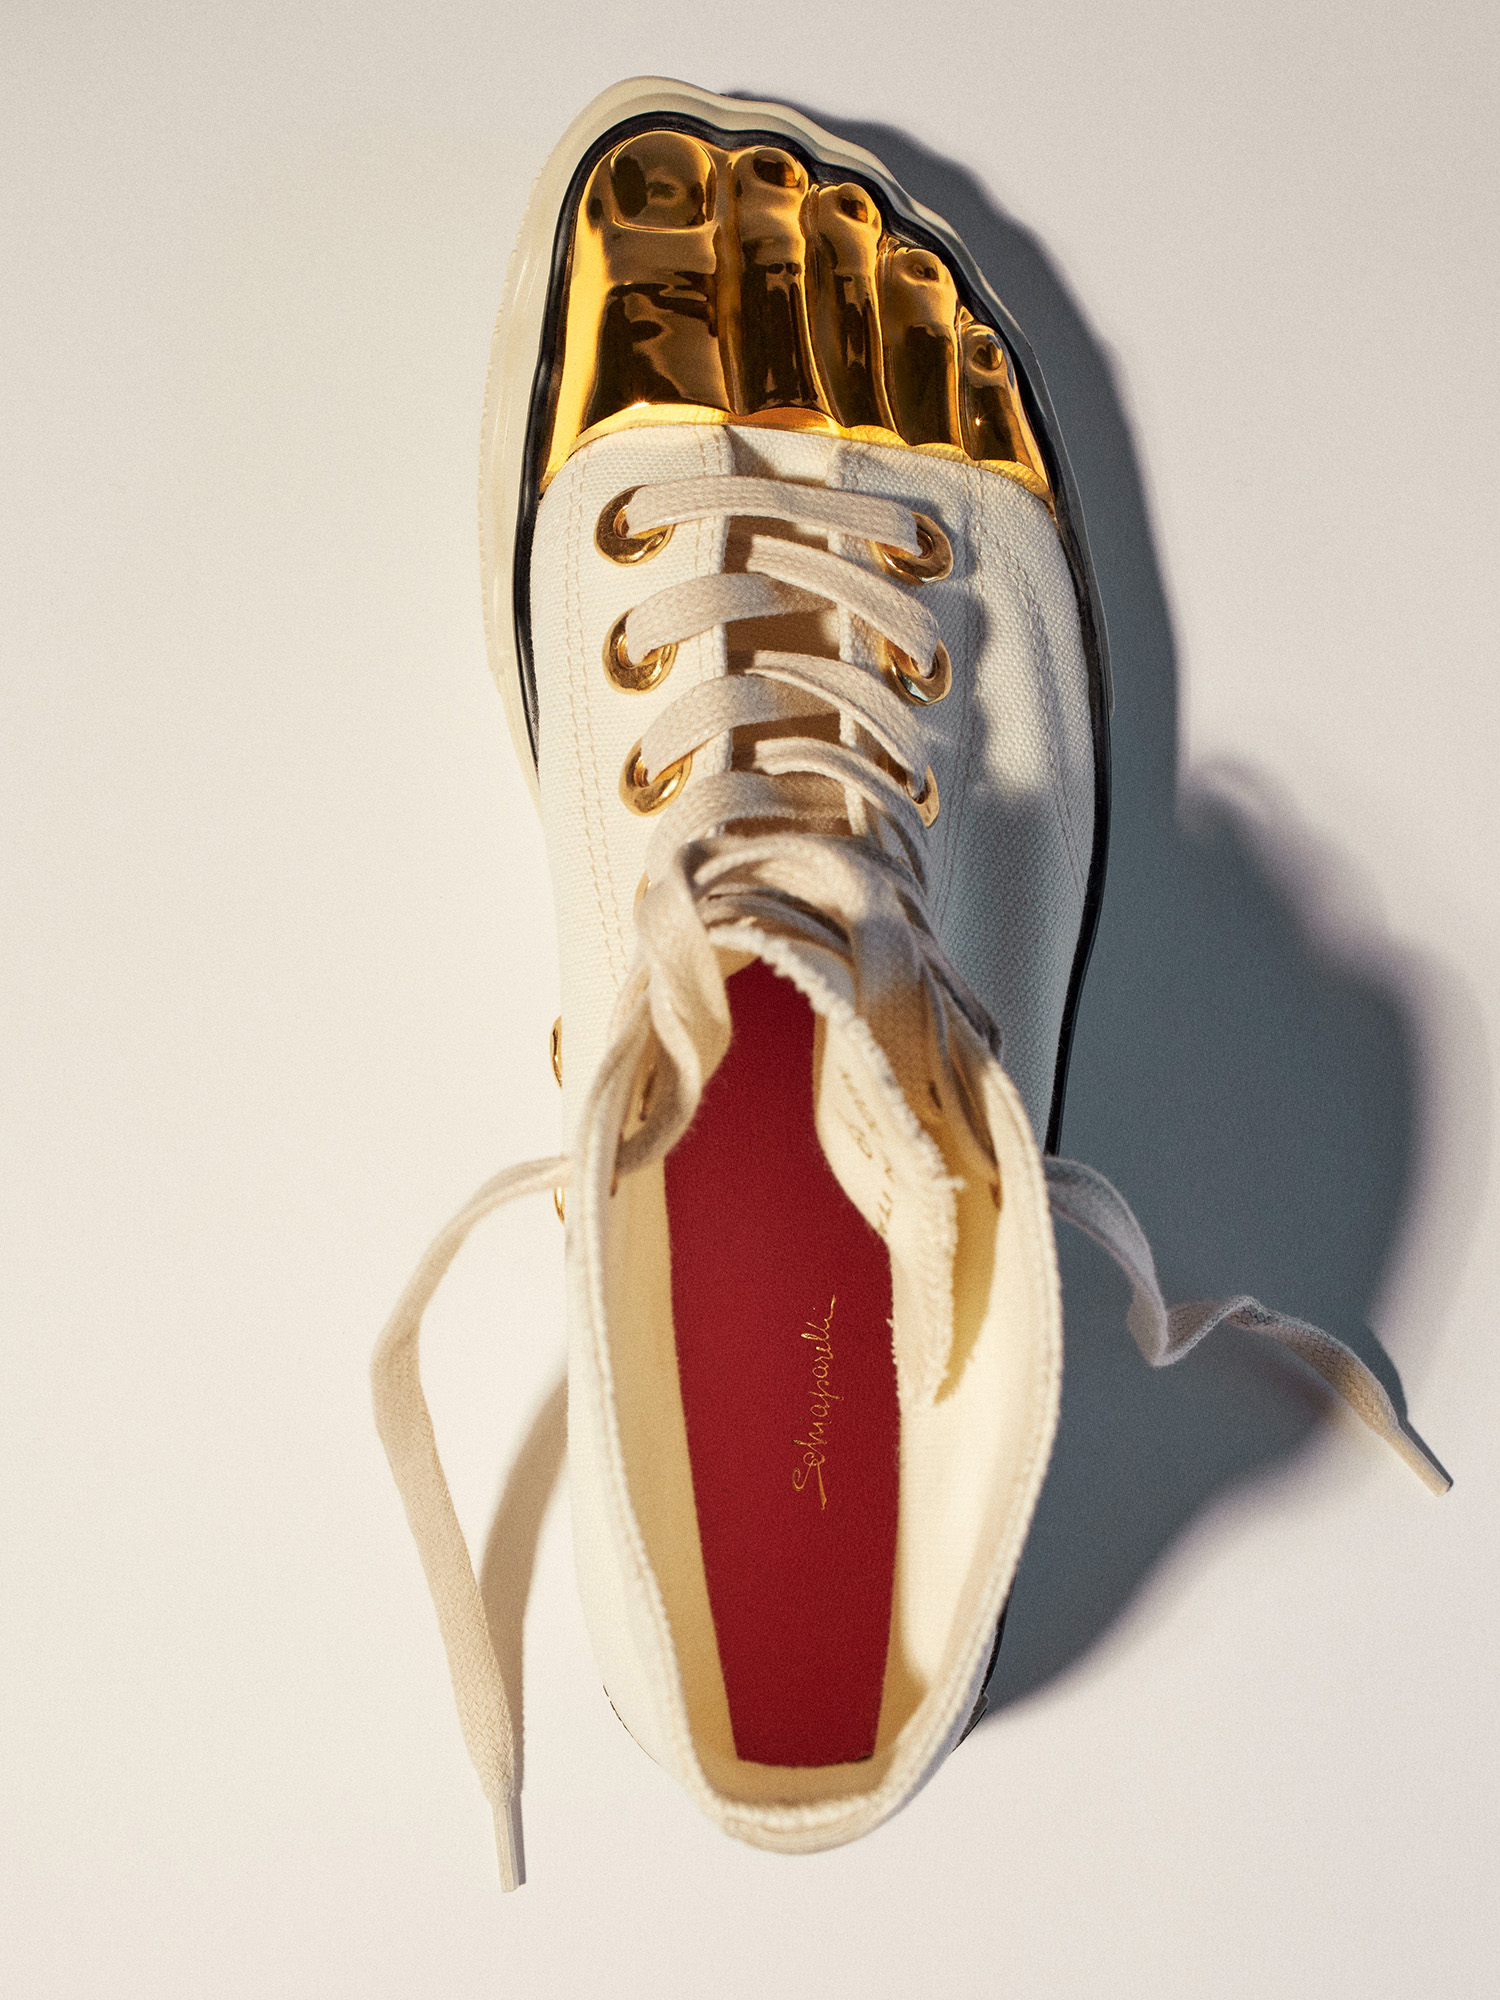 Schiaparelli debuts "Gold Toe Trainers," its first-ever sneaker